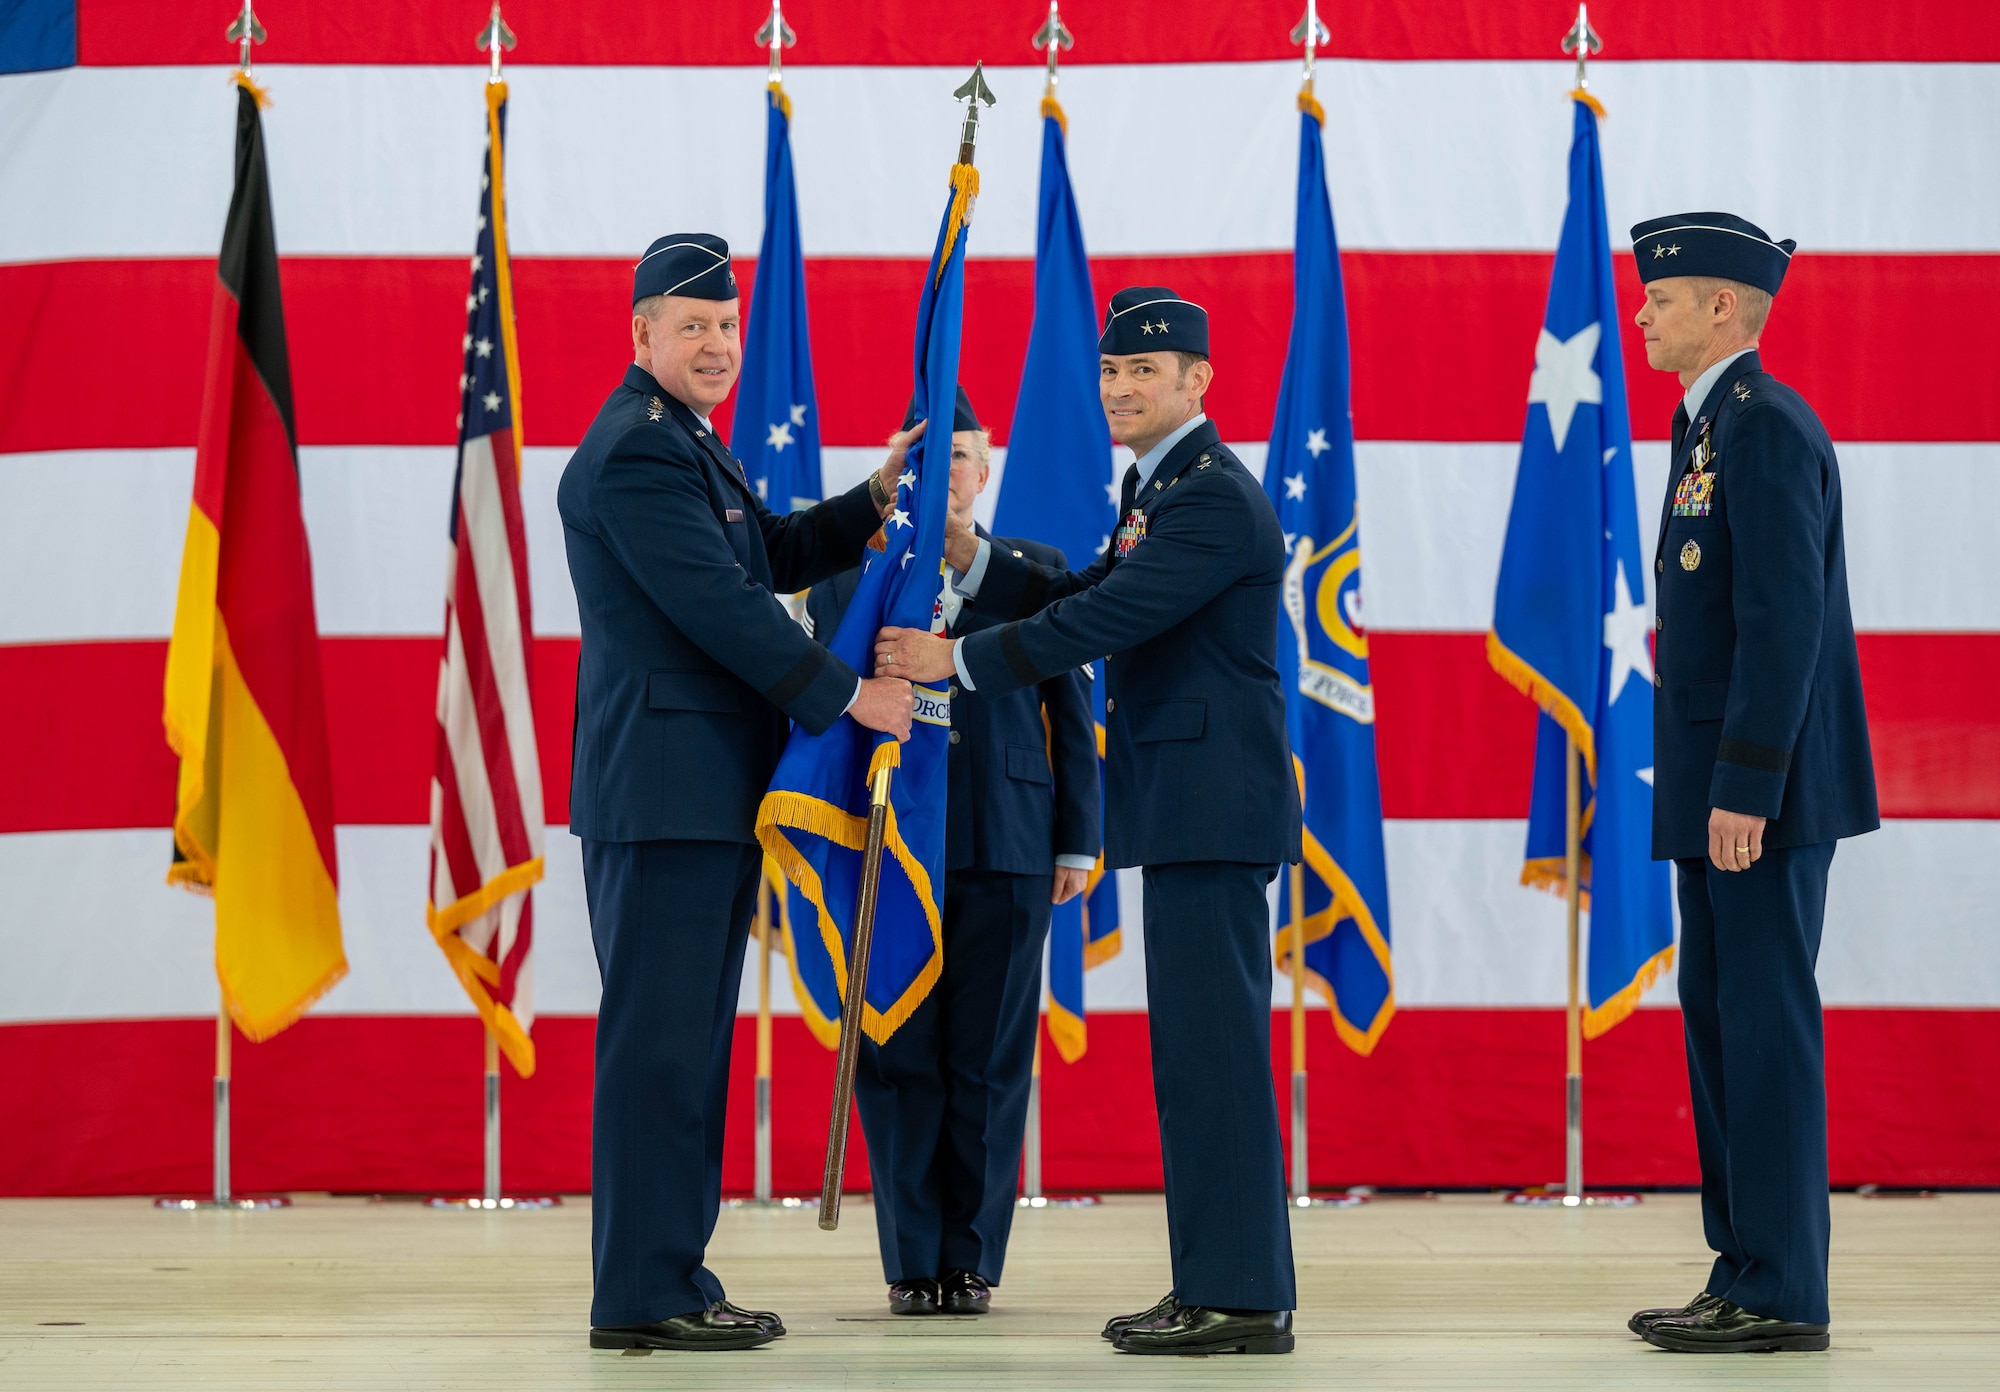 Change of Command is carried out